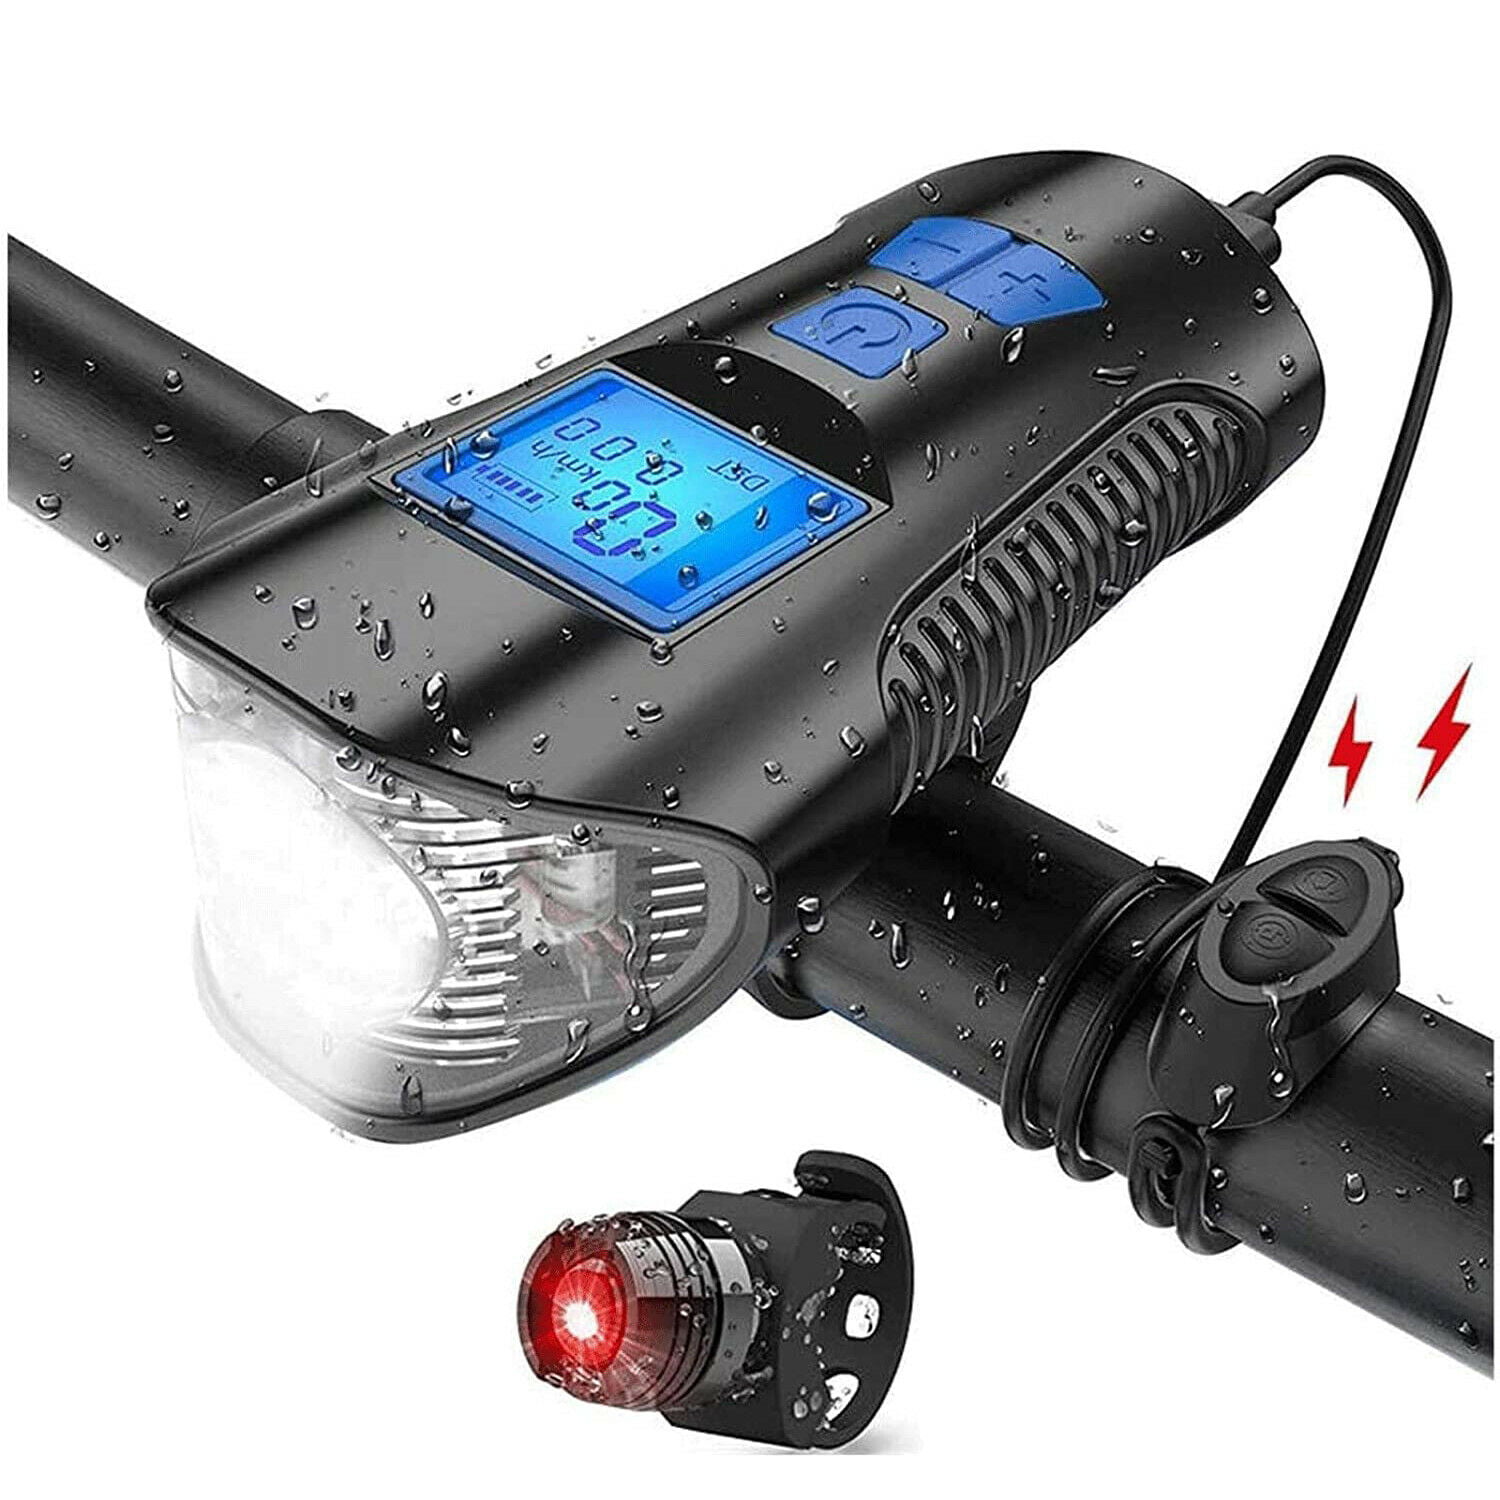 Details about   MTB Bike Manual Focus Anti-Water Headlight Flash Easy Mount USB Rechargeable US 